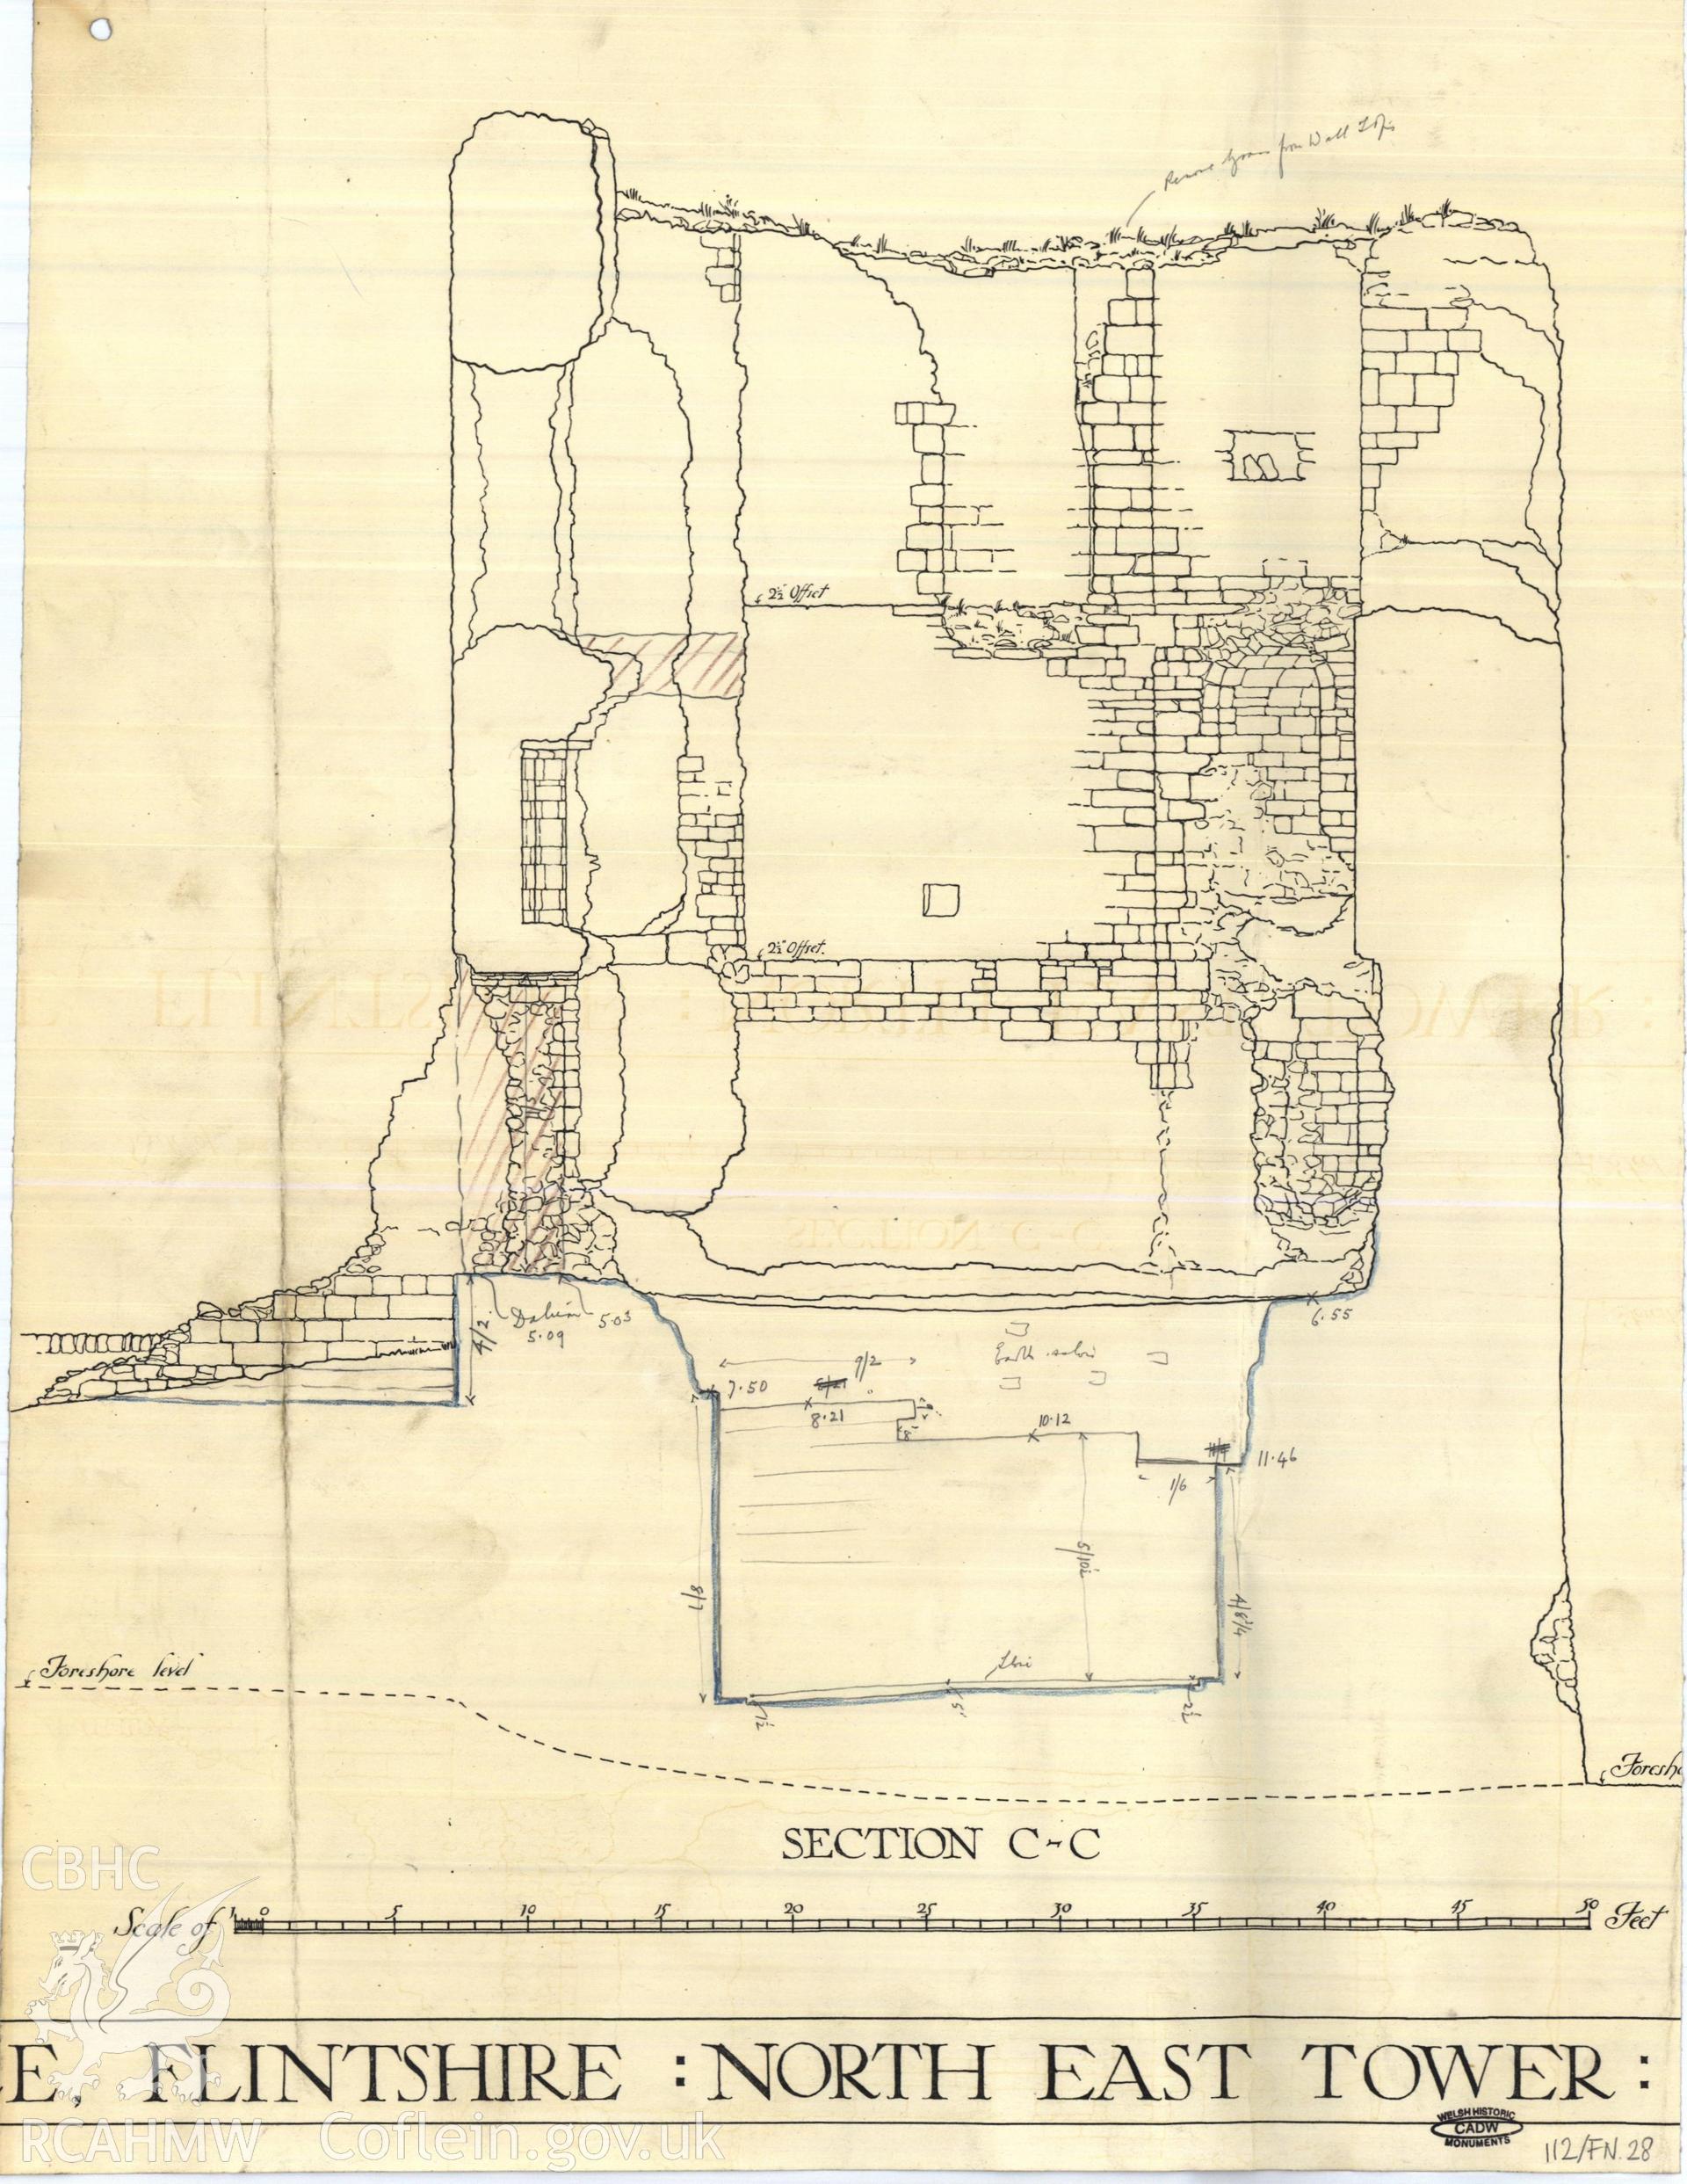 Cadw guardianship monument drawing of Flint Castle. NE tower, section (ex 112/7). Cadw Ref. No:112/FN.28. No scale.